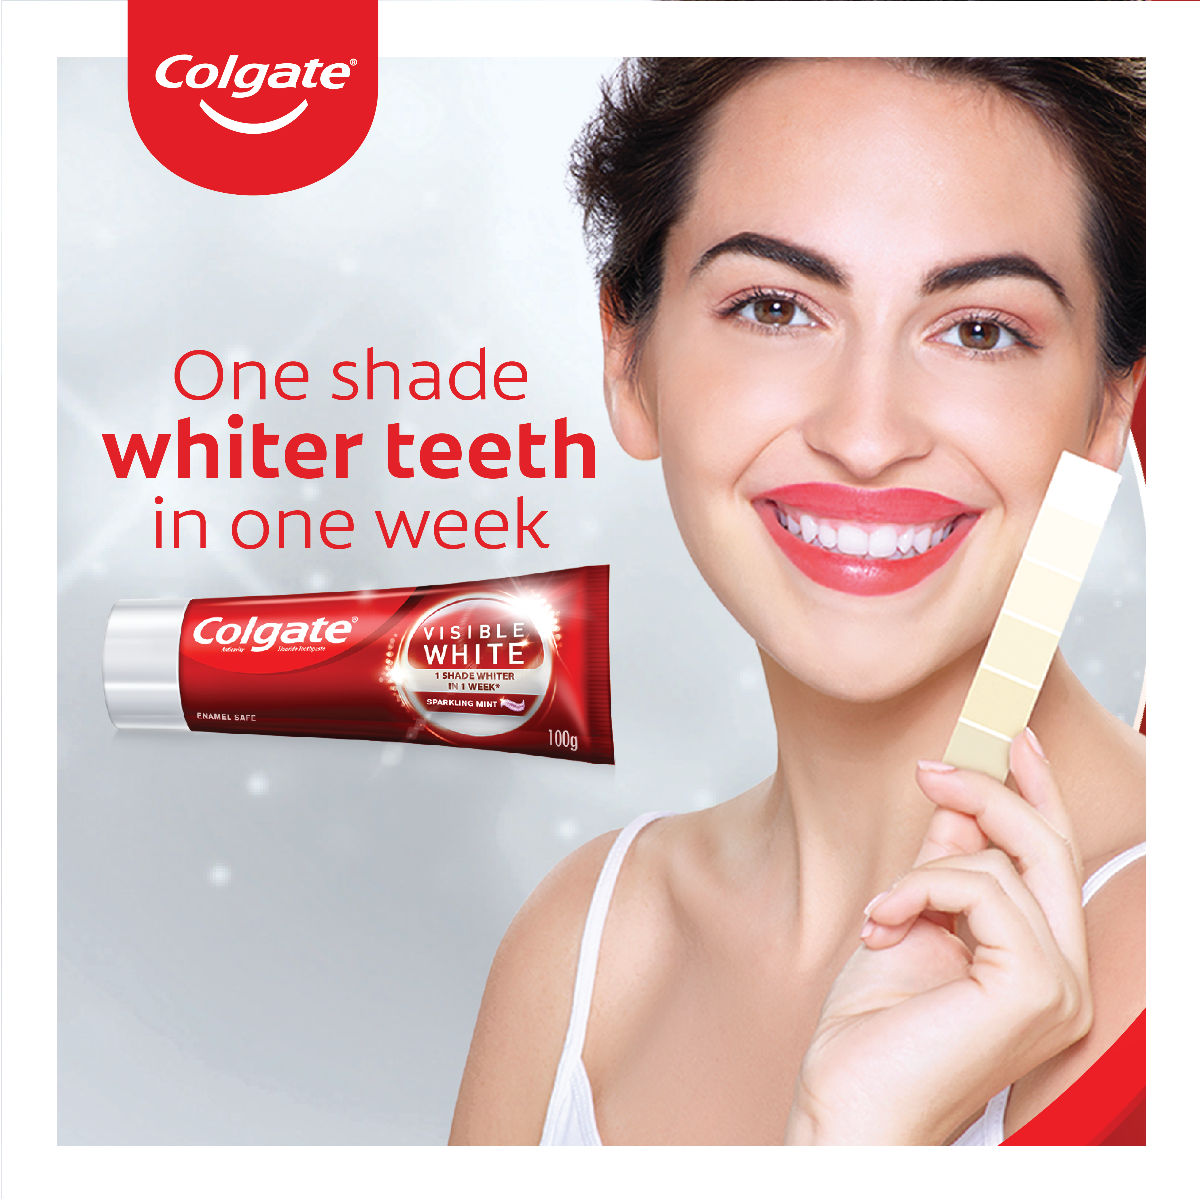 Colgate Visible White Sparkling Mint Toothpaste, 50 gm, Pack of 1 